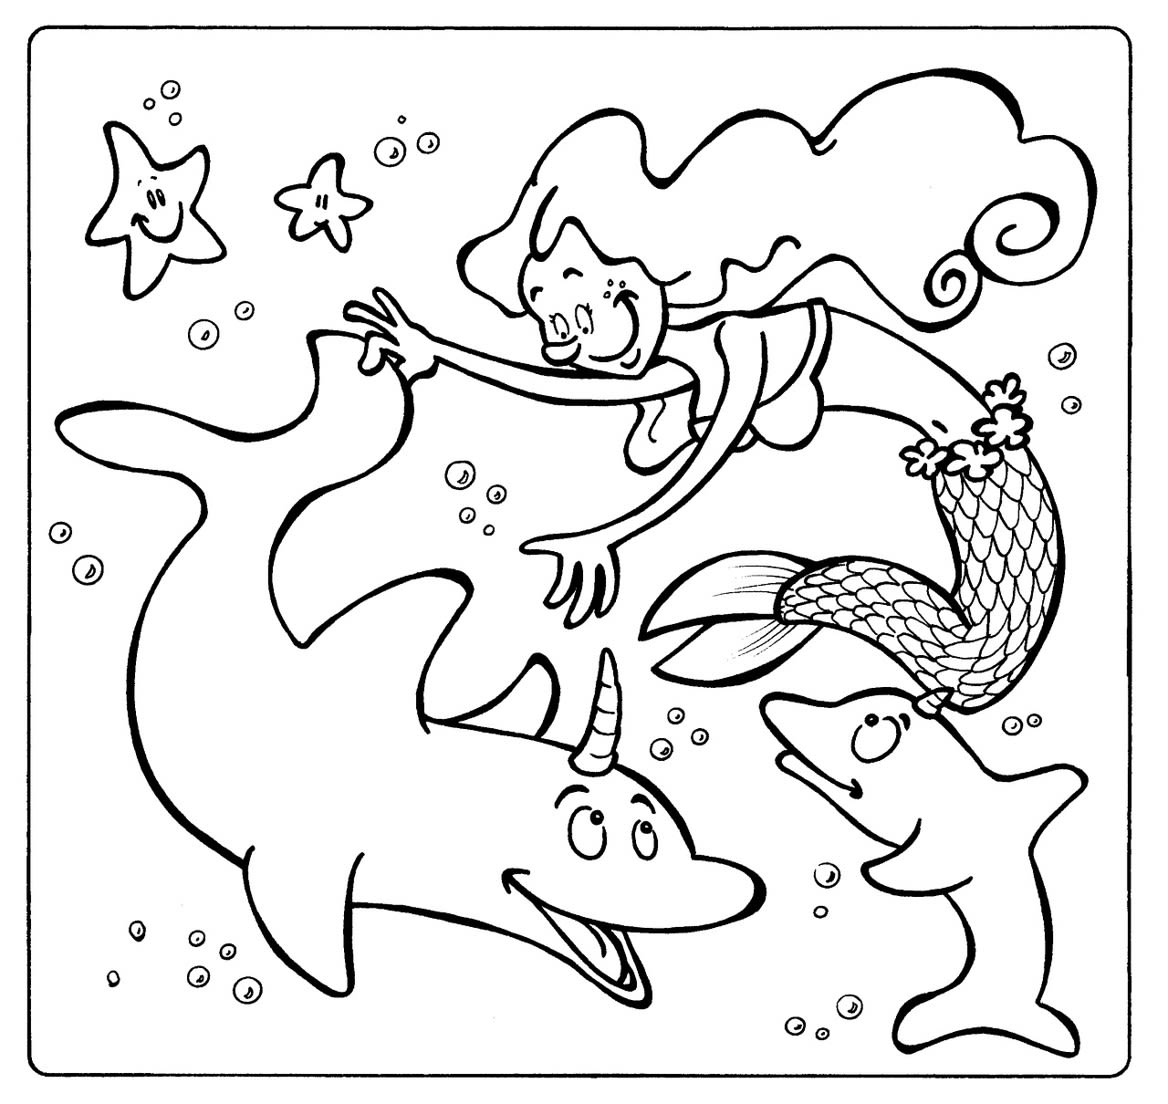 Following Directions With Visual Supports - A Mermaid and Dolphin Activity image